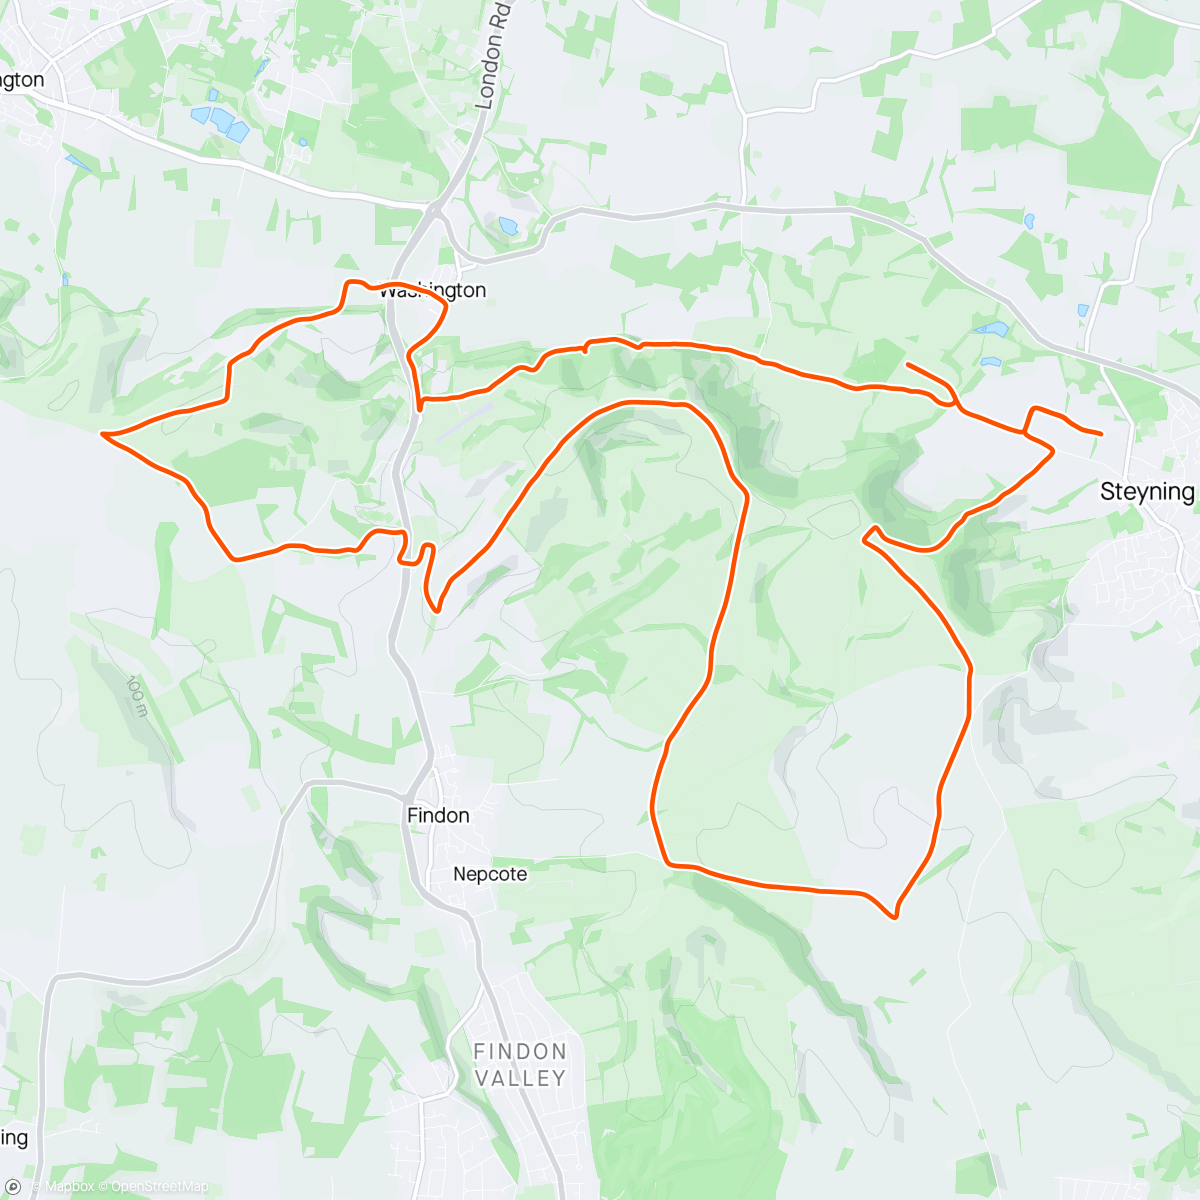 「Steyning Stinger 30km route」活動的地圖